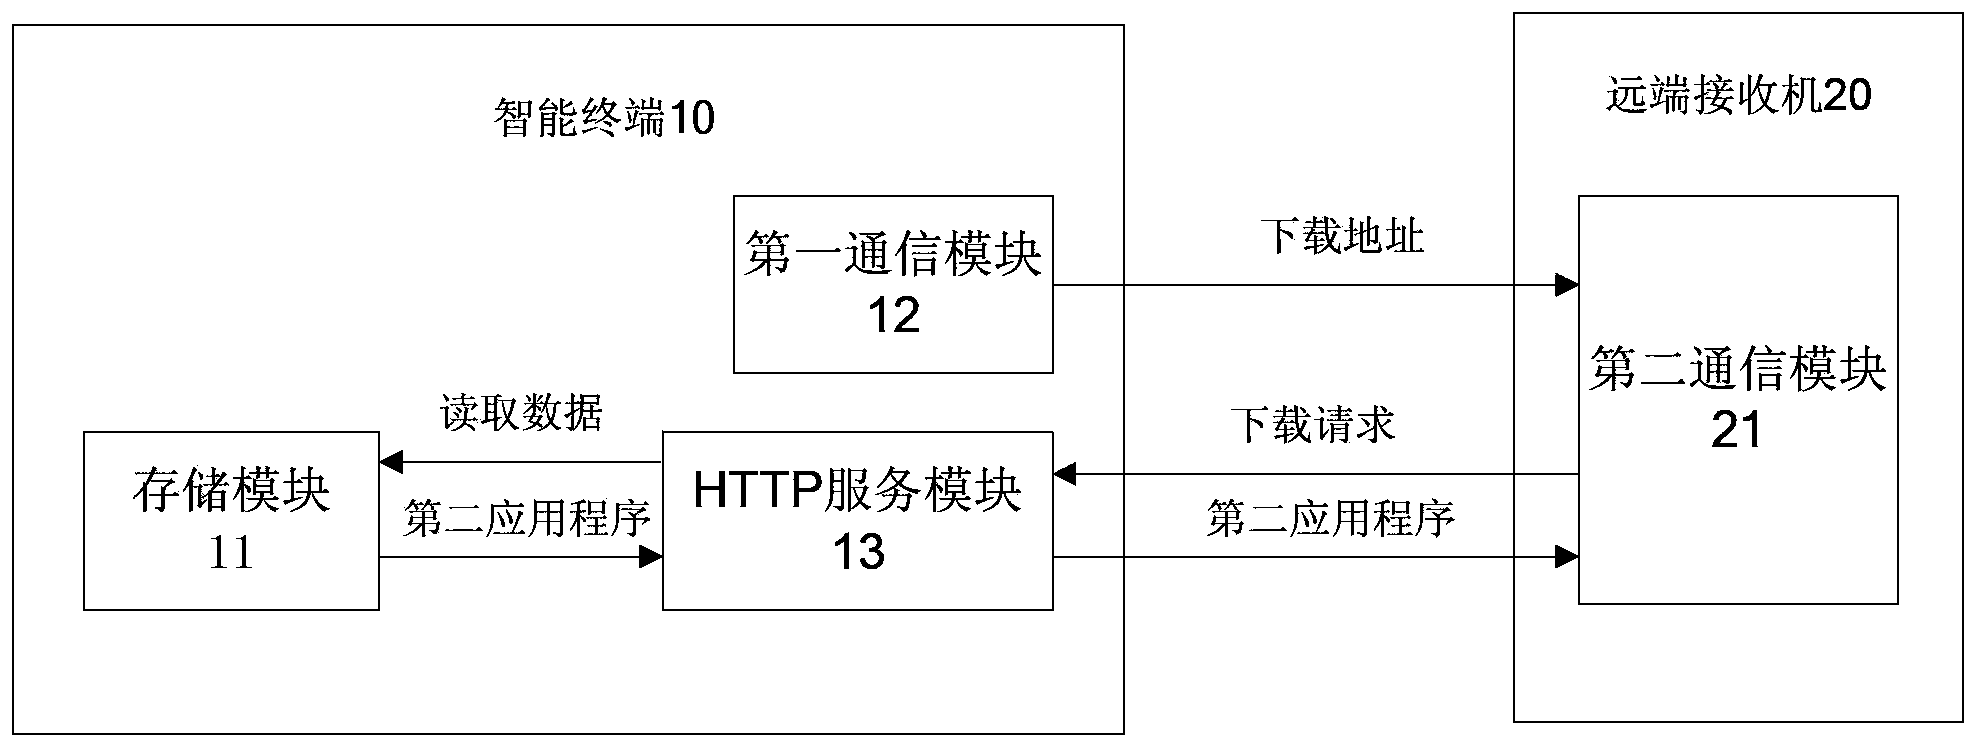 Multi-screen interaction communication system and method